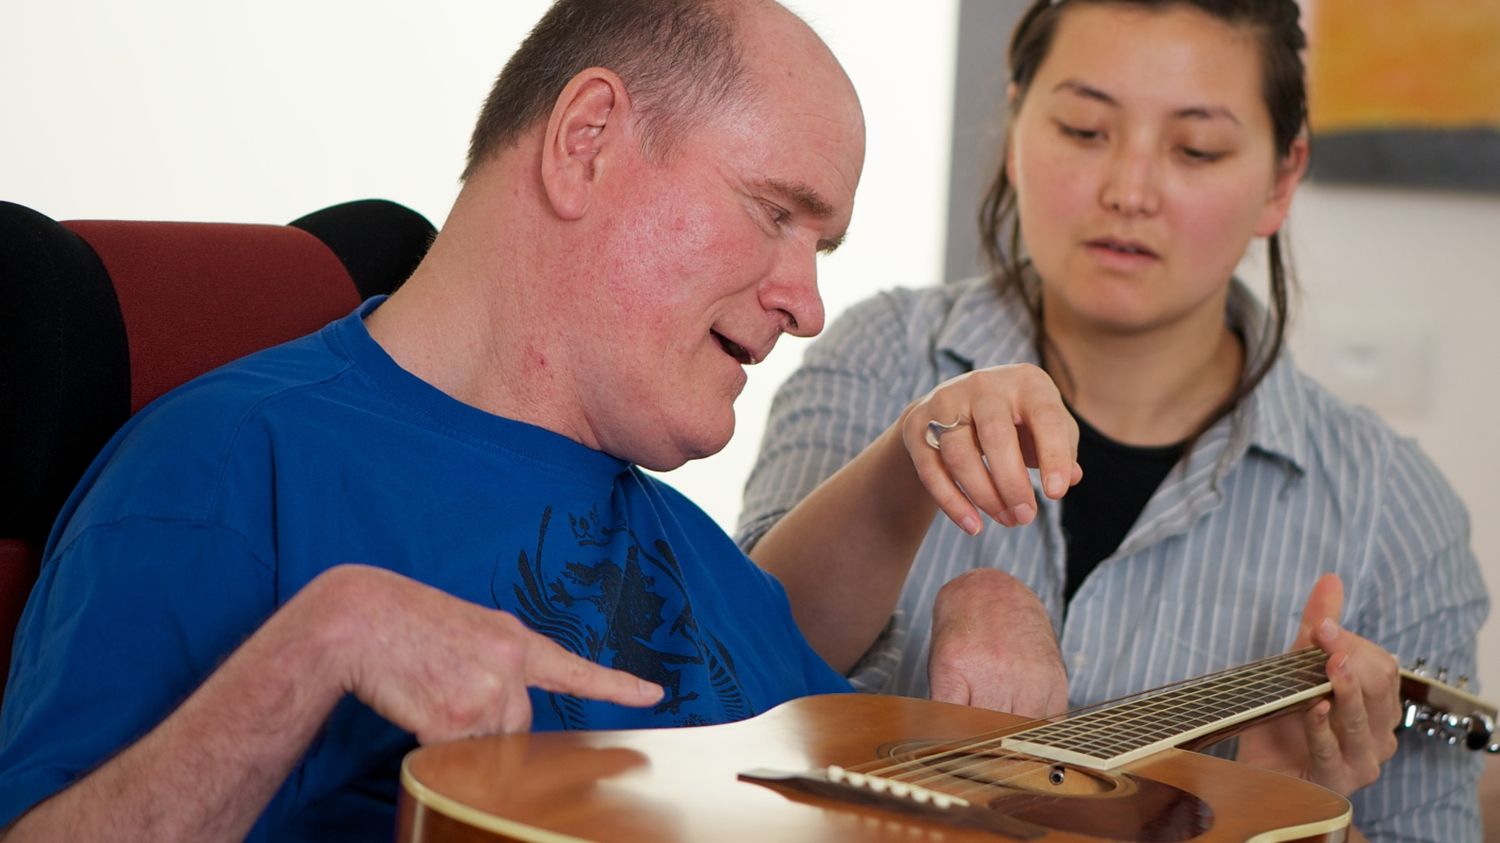 How Many Current Job Opening Are There For Music Therapy